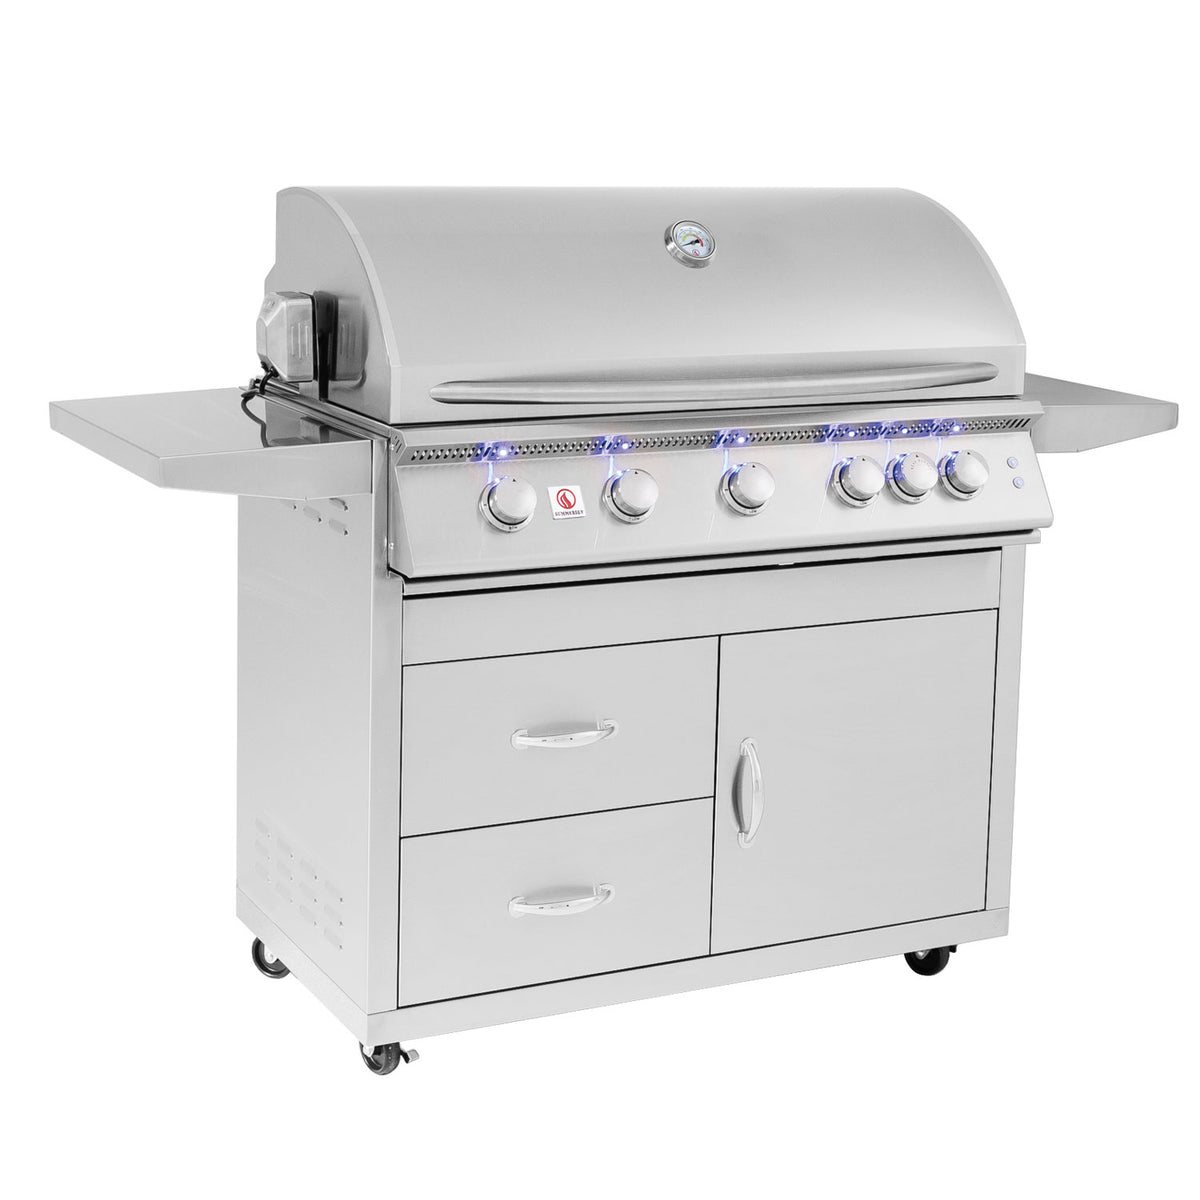 Sizzler Pro 40" Freestanding Grill